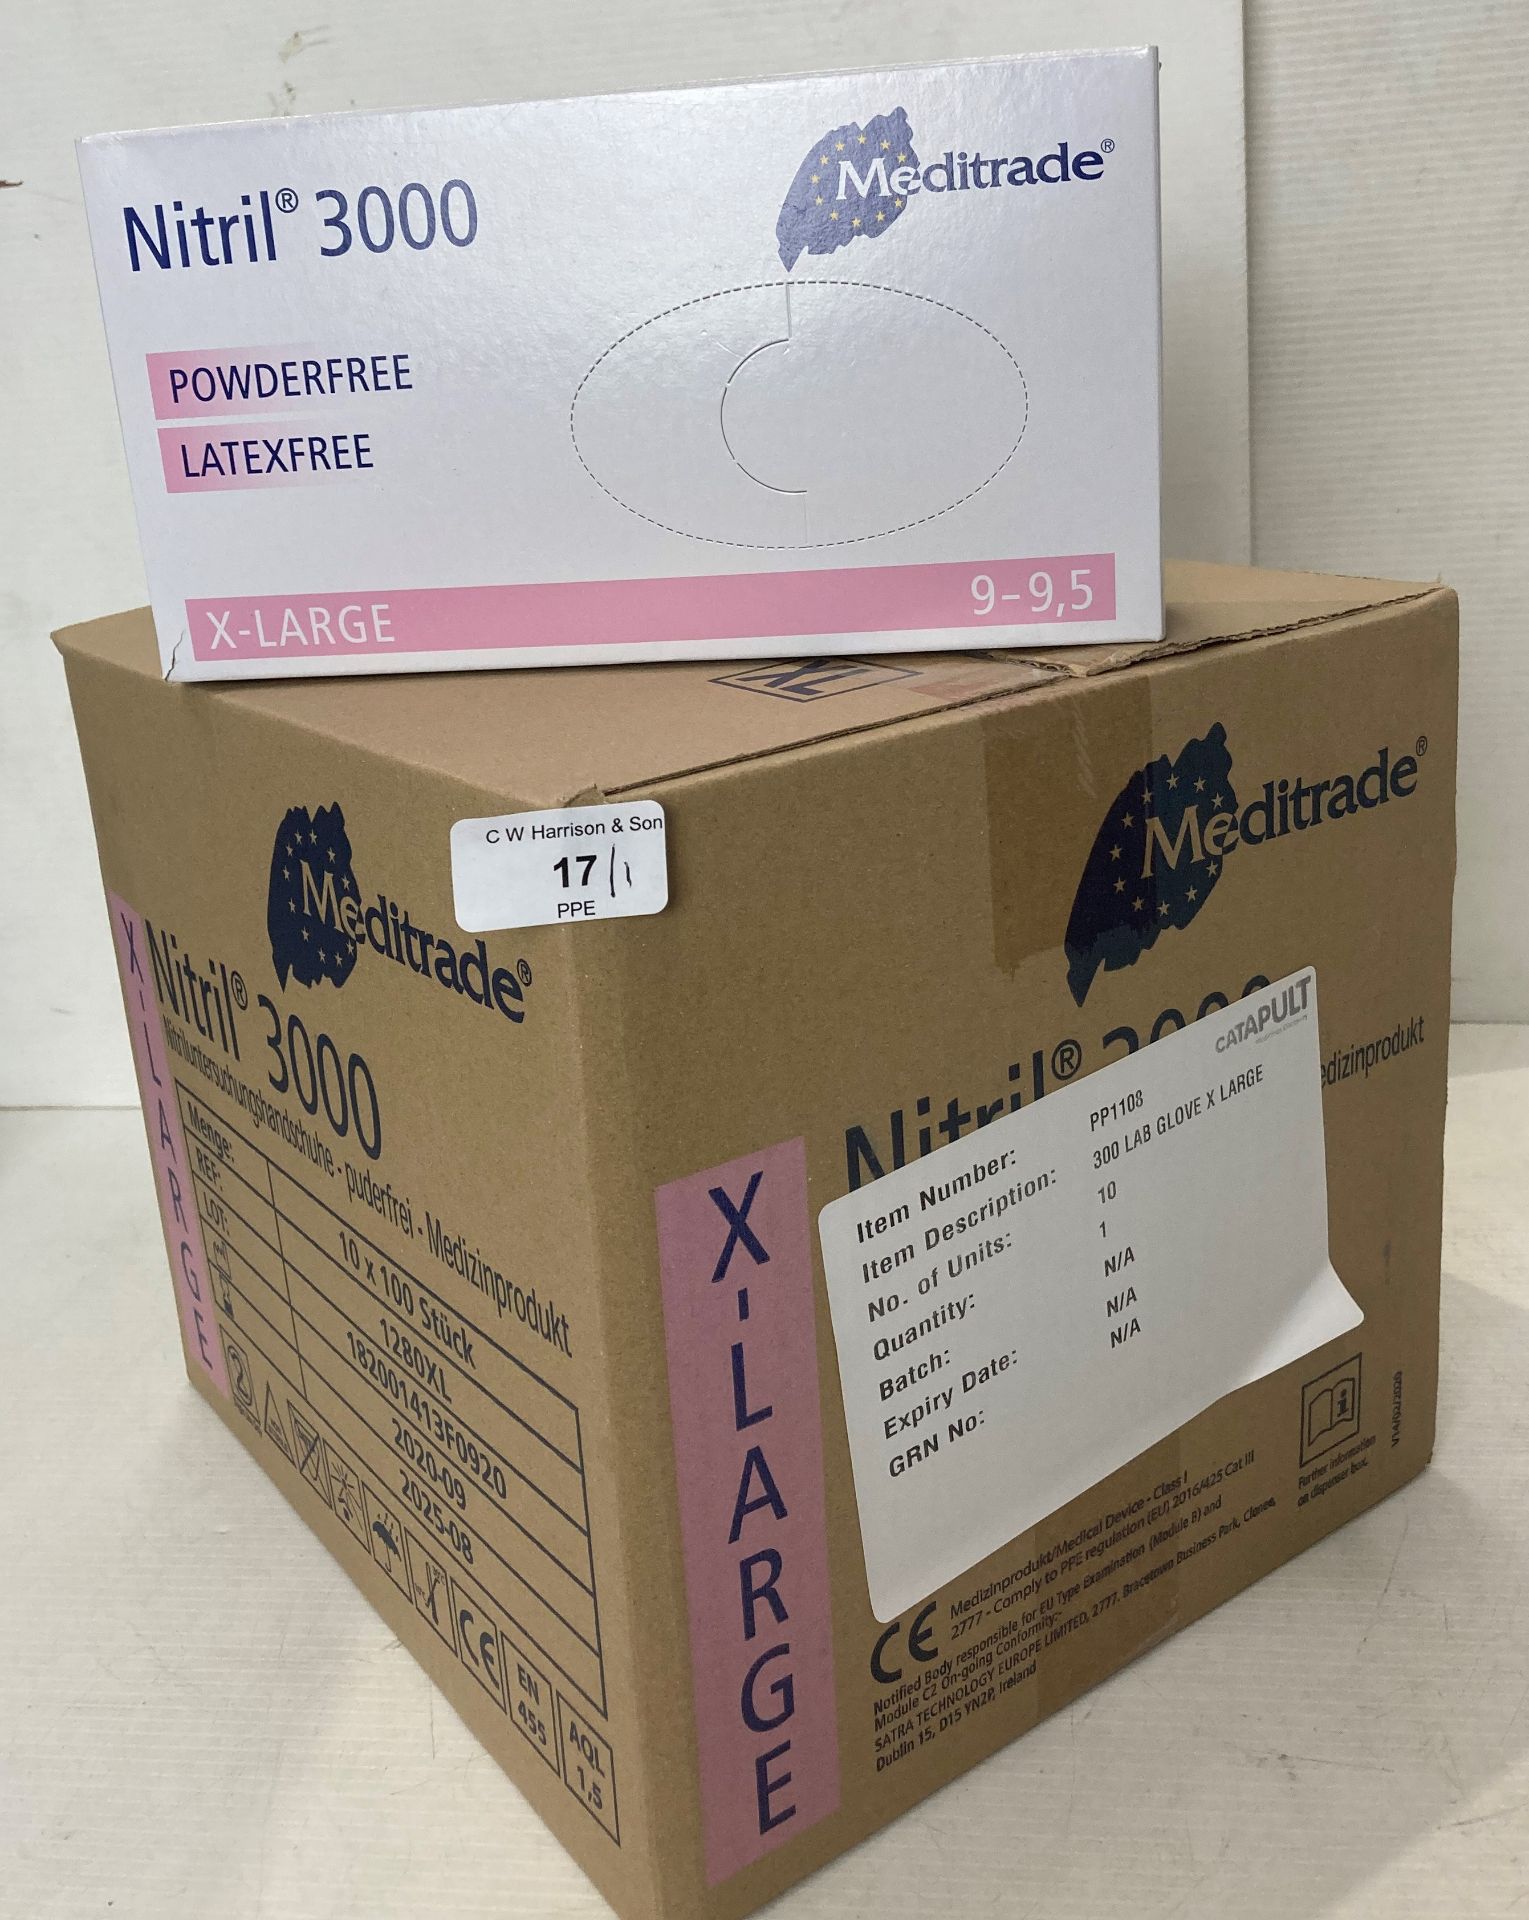 10 boxes of (1 outer boxes) Meditrade Nitrile 3000 LAB gloves - size XL